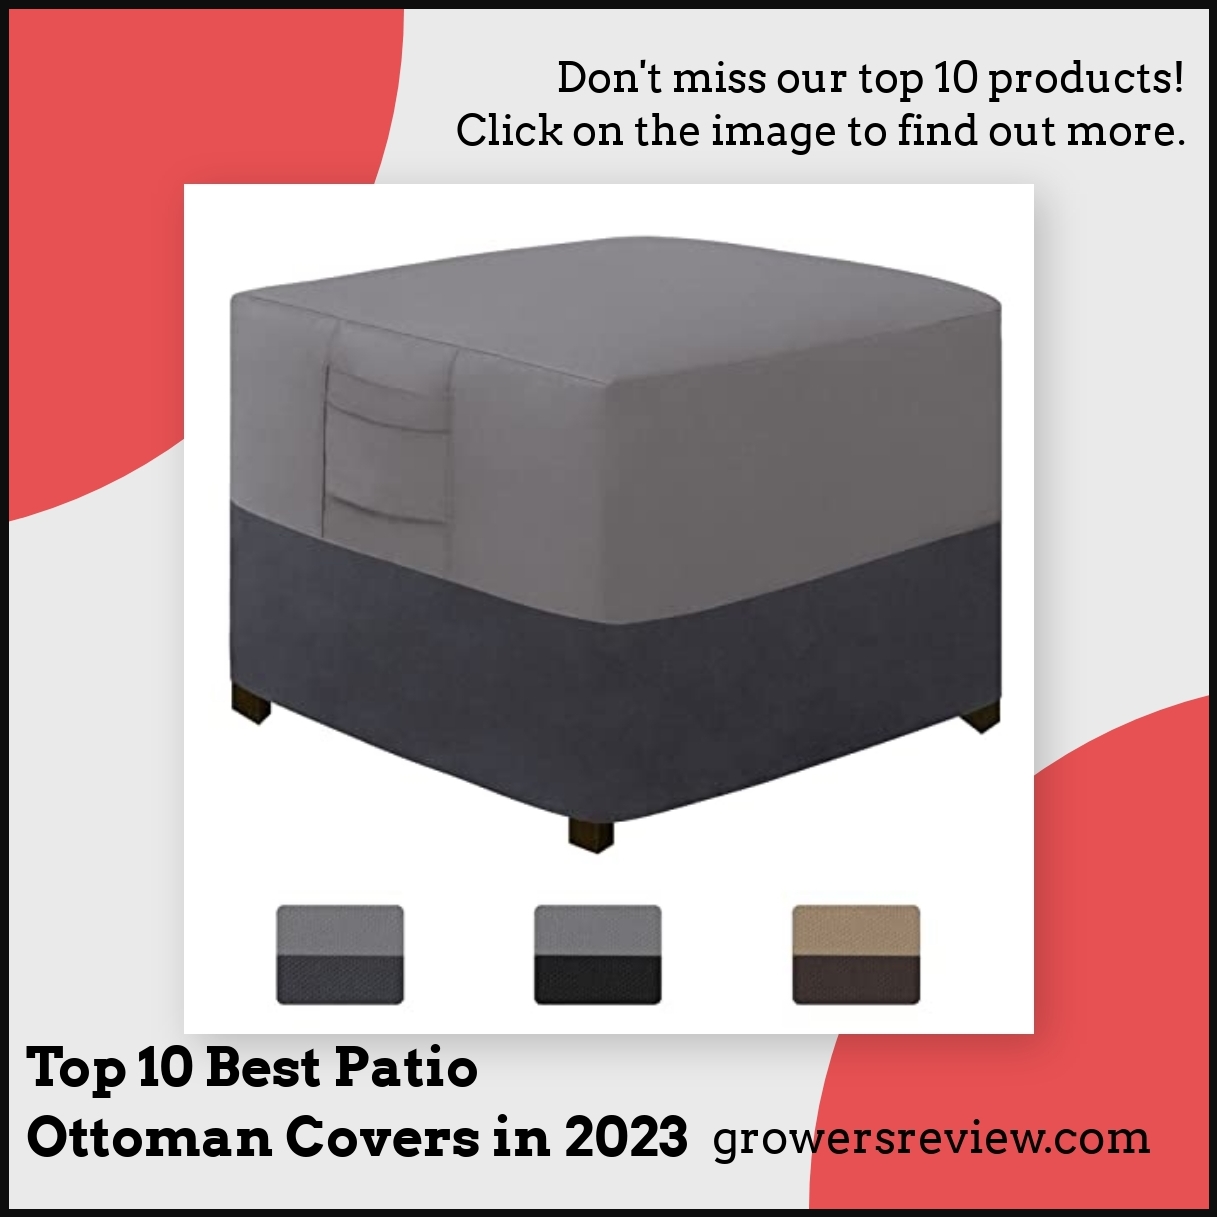 Top 10 Best Patio Ottoman Covers in 2023